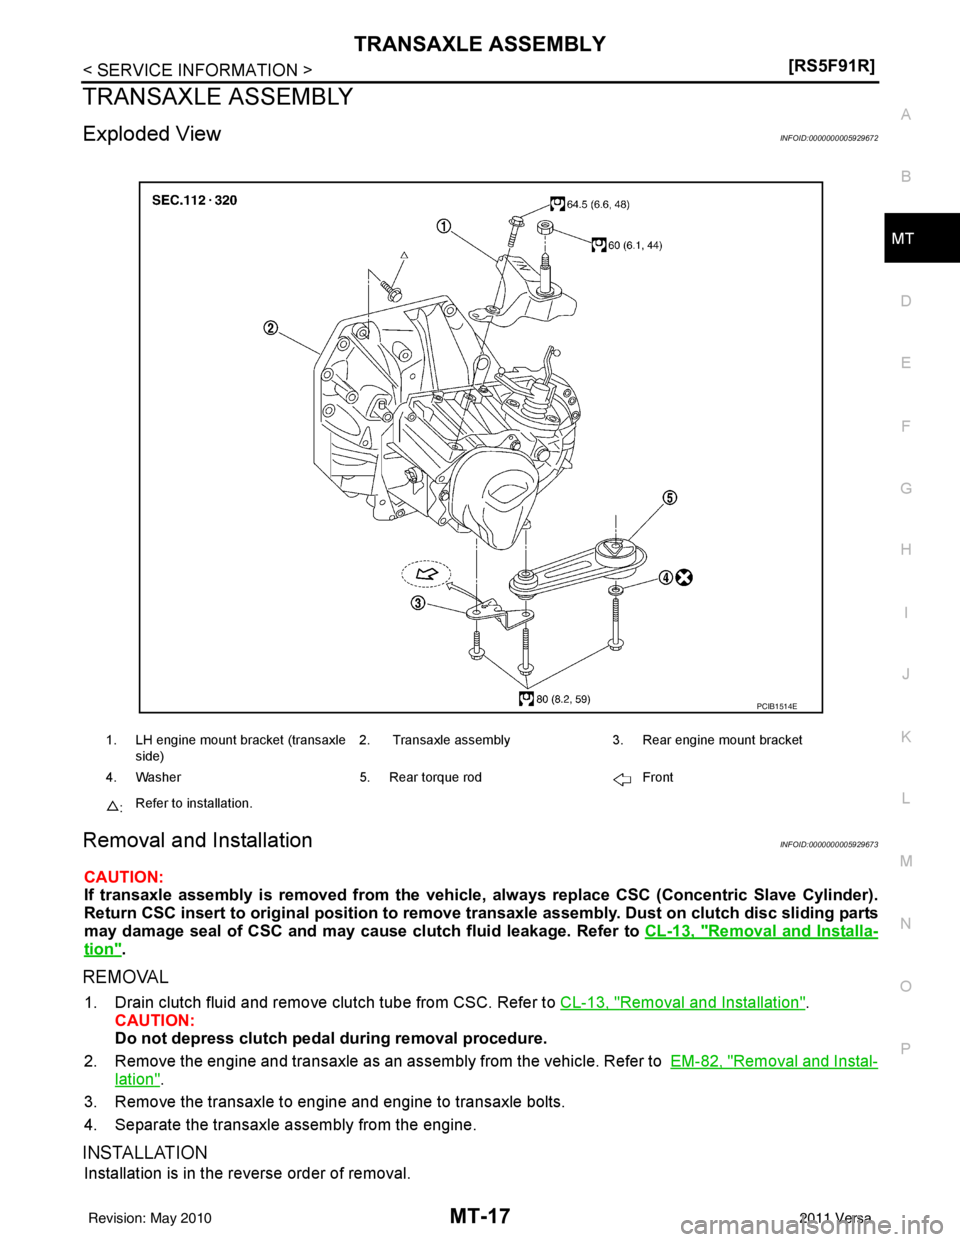 NISSAN LATIO 2011  Service Repair Manual TRANSAXLE ASSEMBLYMT-17
< SERVICE INFORMATION > [RS5F91R]
D
E
F
G H
I
J
K L
M A
B
MT
N
O P
TRANSAXLE ASSEMBLY
Exploded ViewINFOID:0000000005929672
Removal and InstallationINFOID:0000000005929673
CAUTI